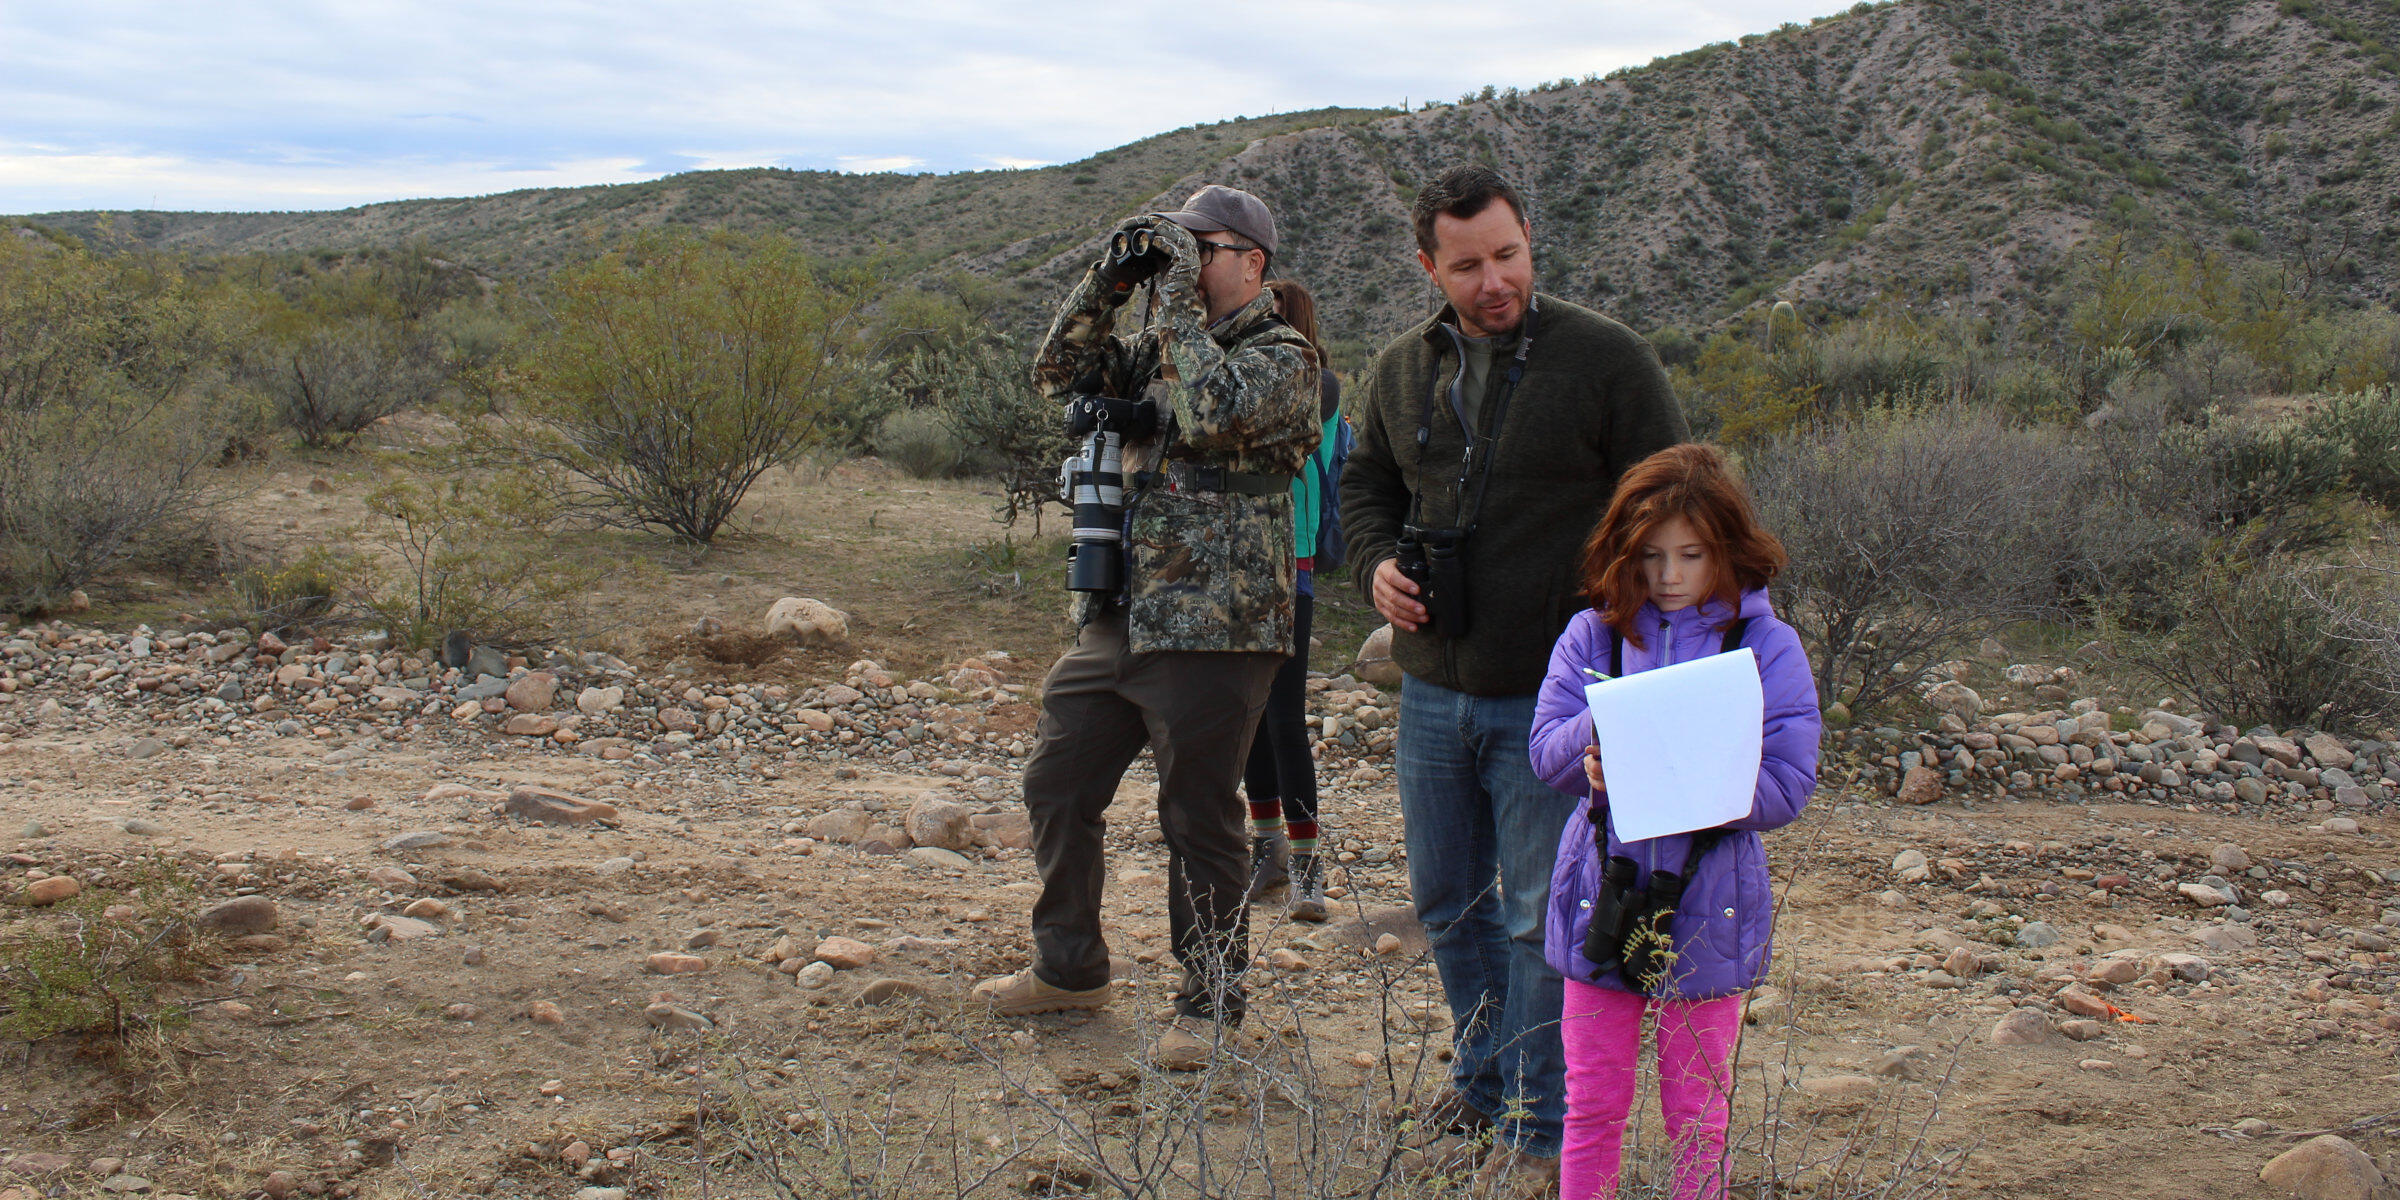 A group of adults and a child conduct a bird count in a cold desert environment.